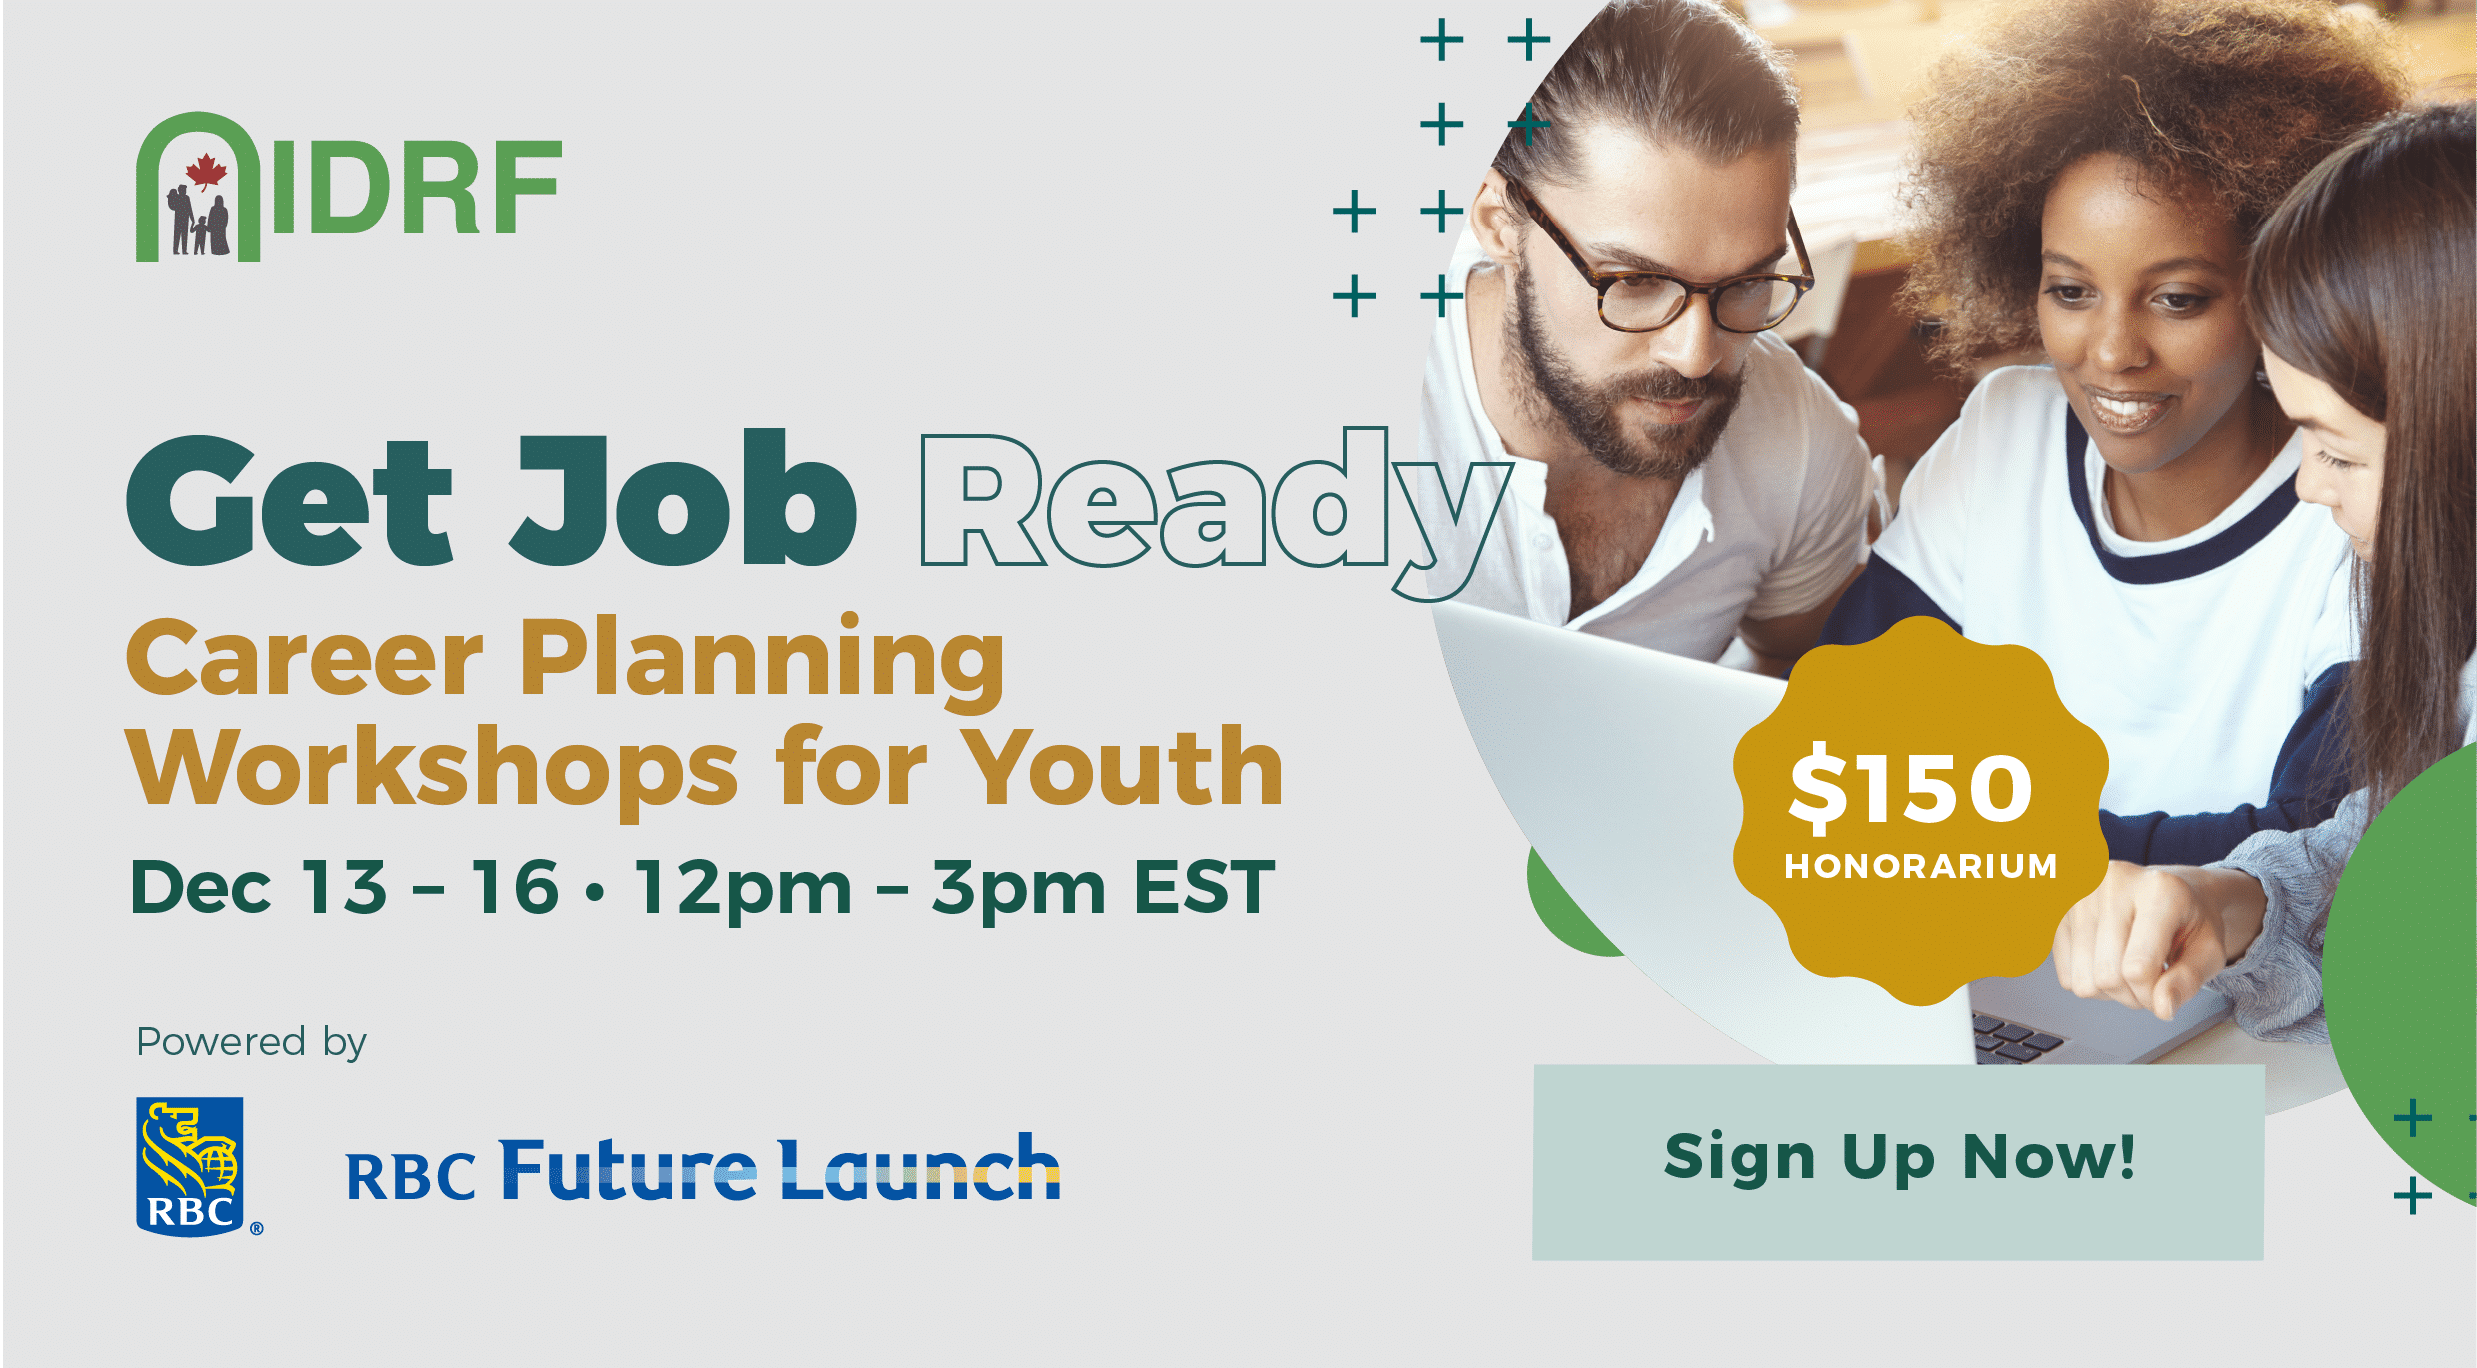 Get Job Ready - Career Planning Workshops for Youth